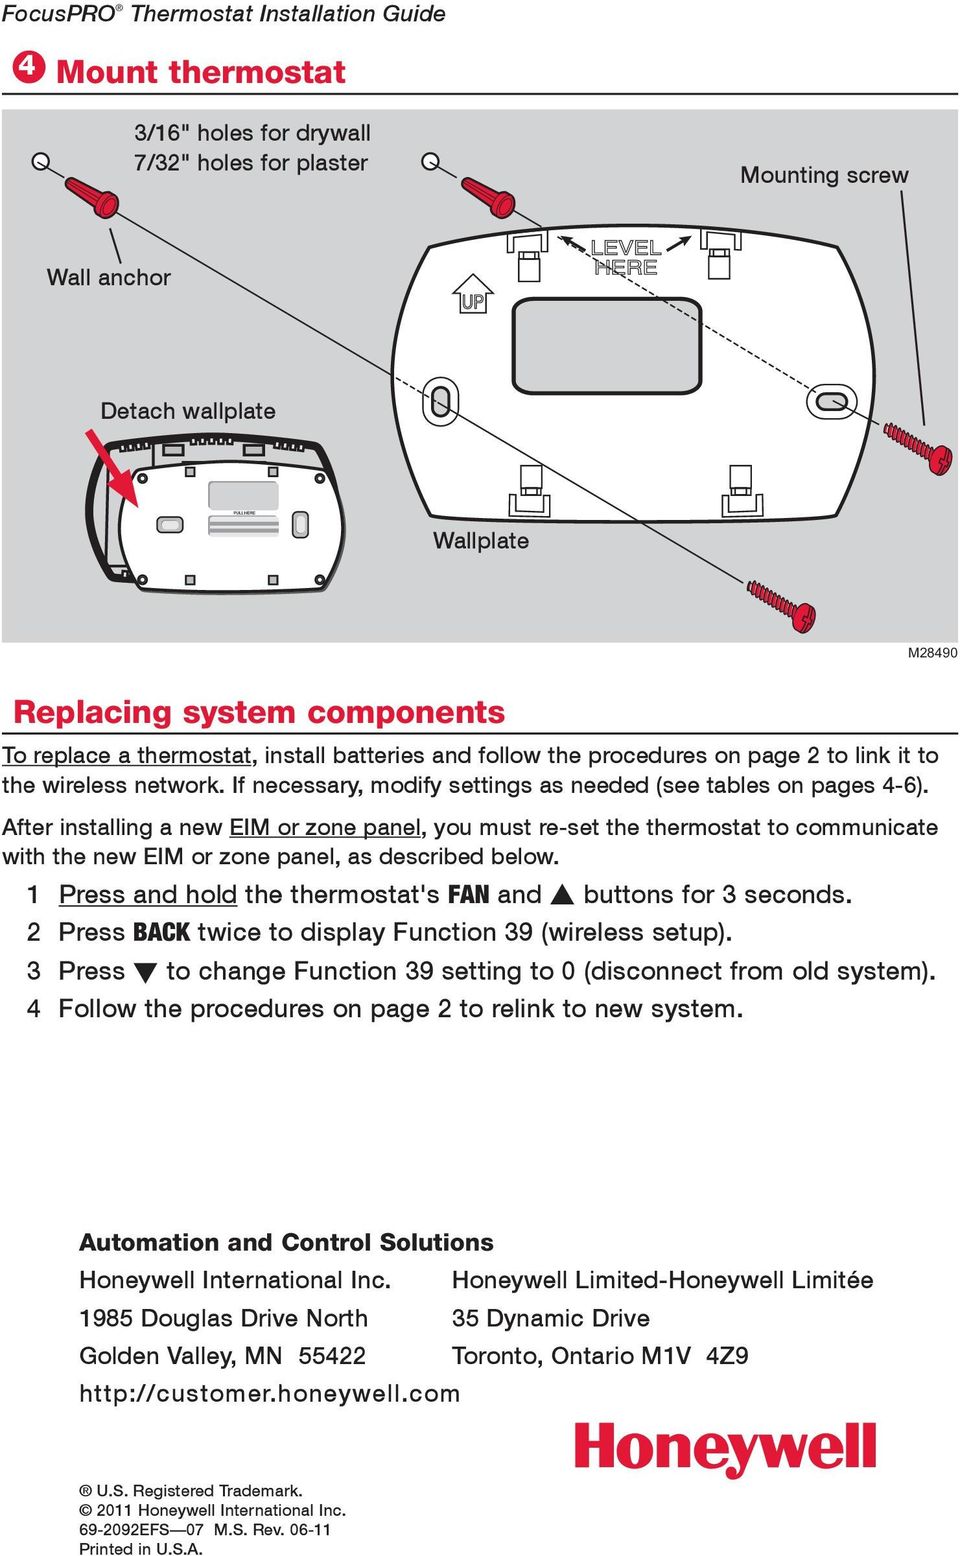 After installing a new EIM or zone panel, you must re-set the thermostat to communicate with the new EIM or zone panel, as described below.